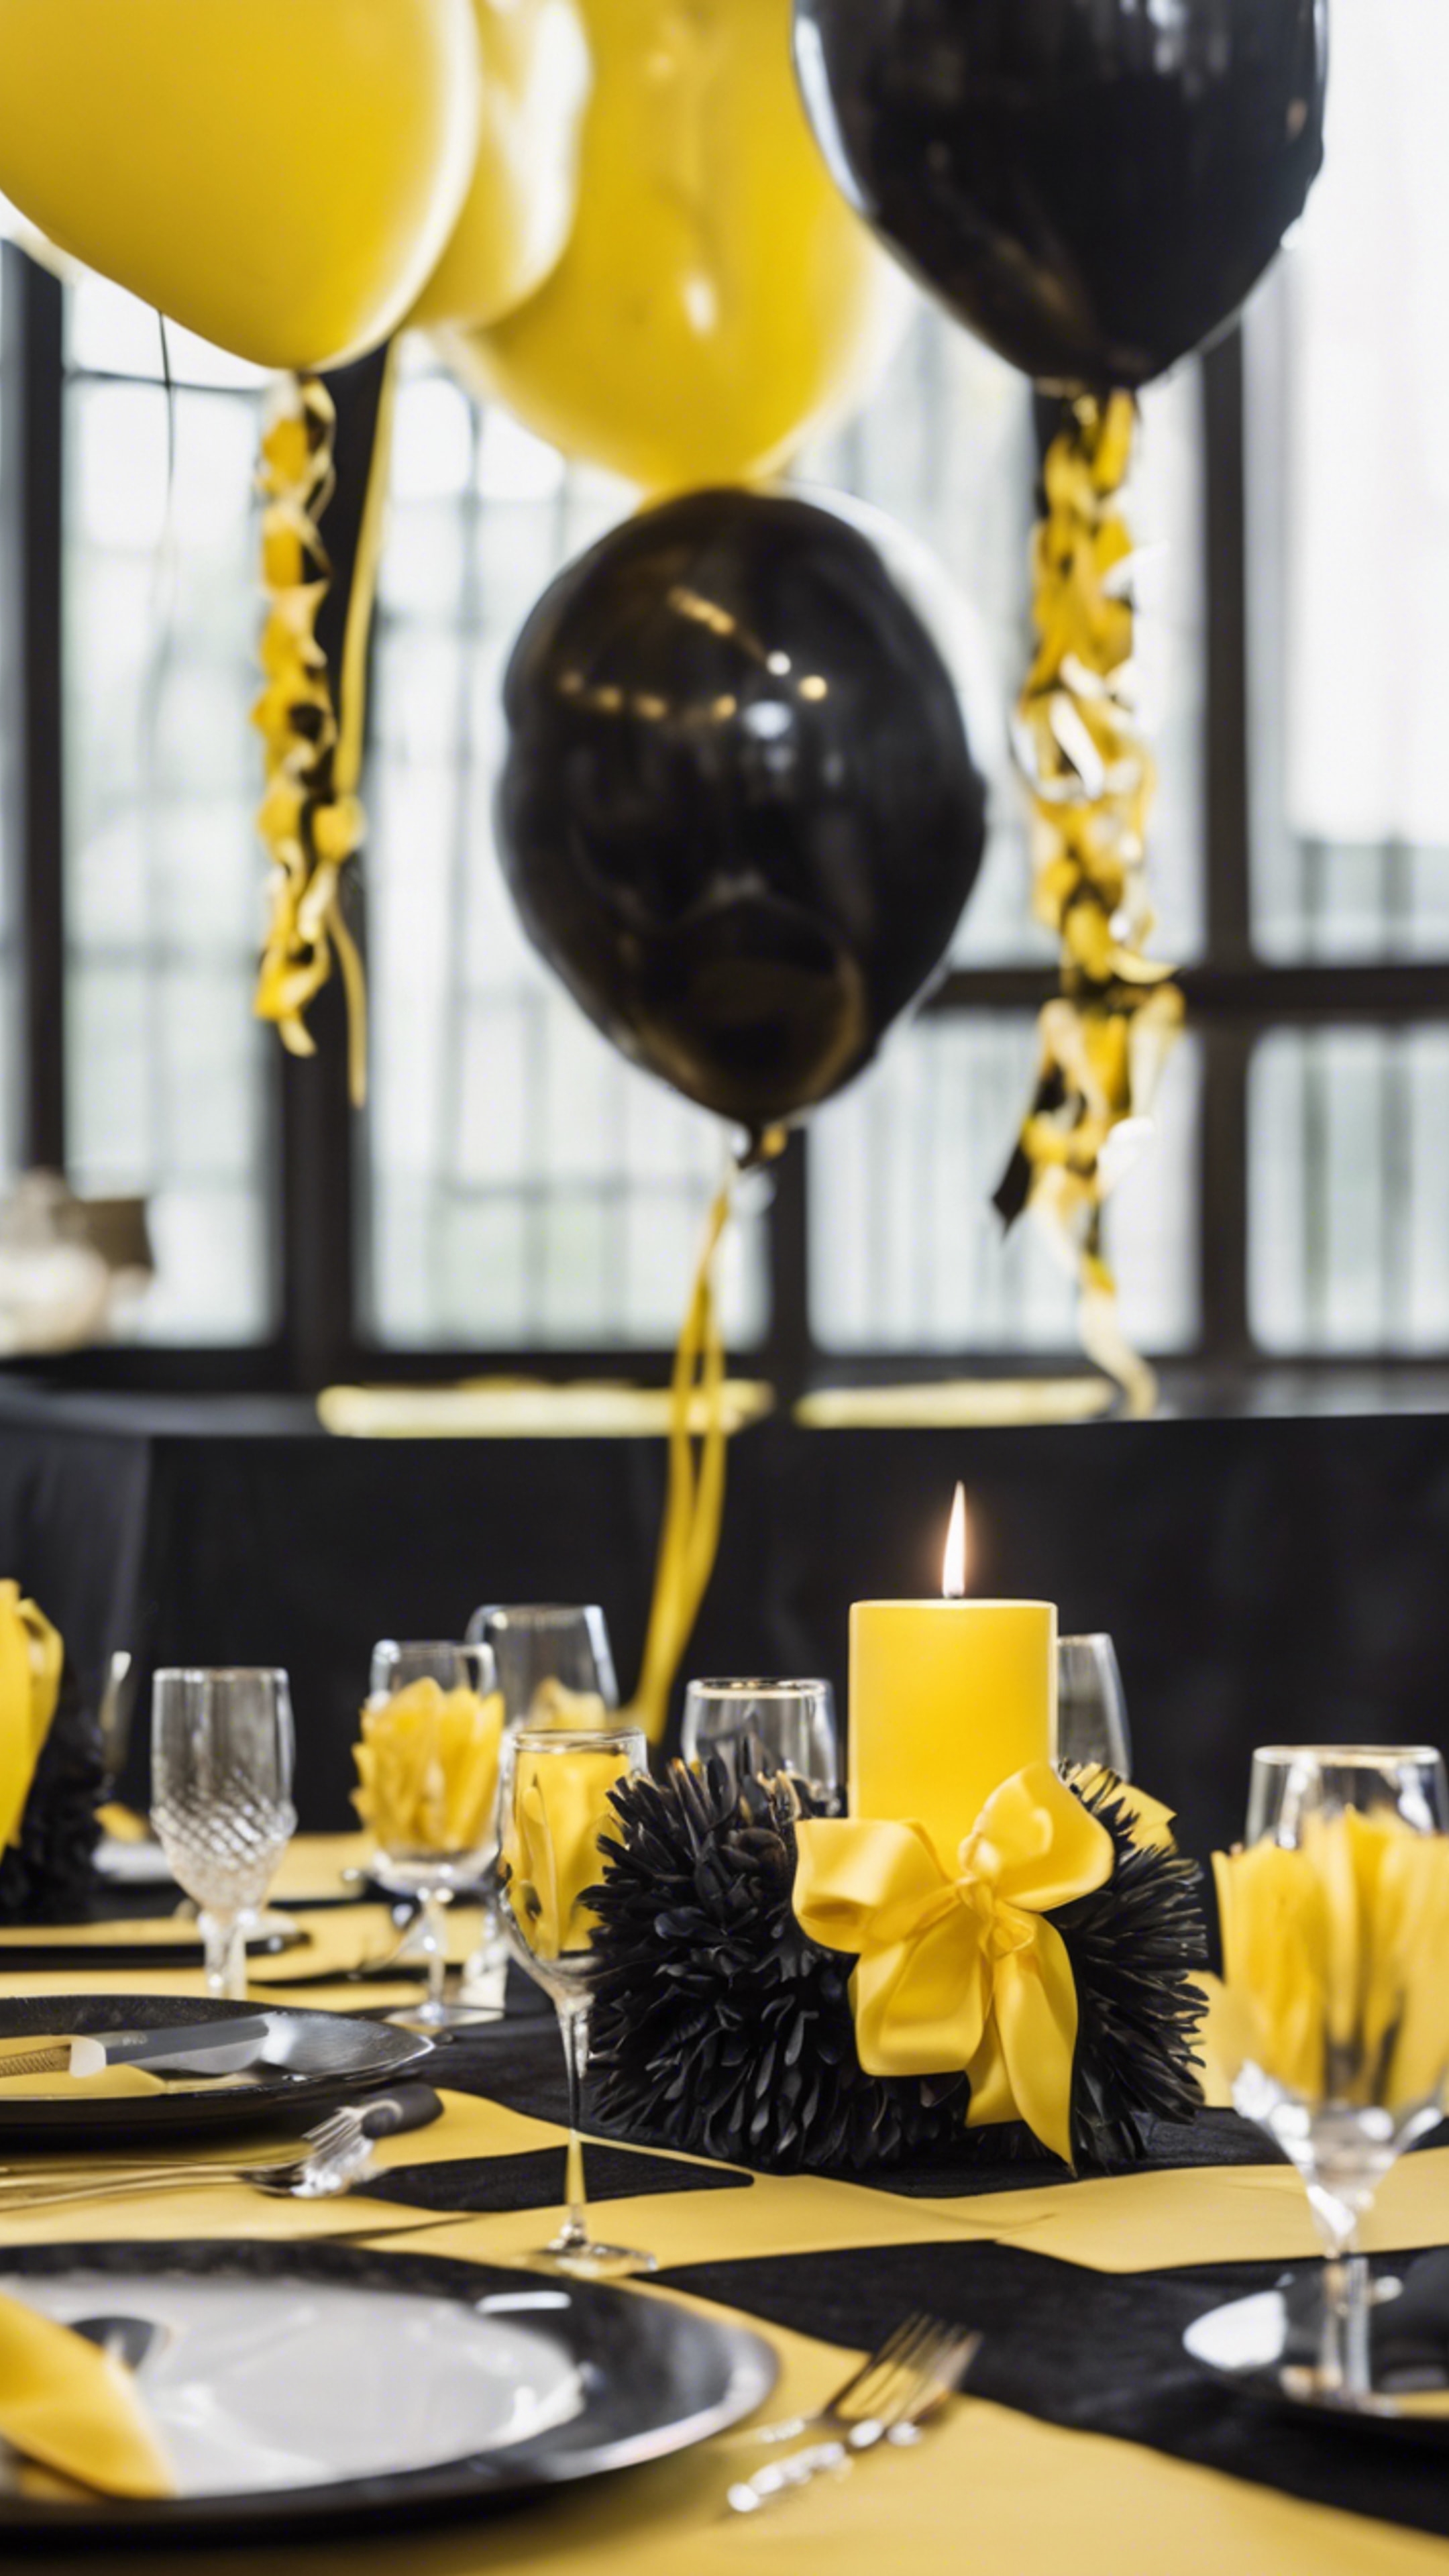 A table set with black and yellow themed party decorations for a birthday celebration. Wallpaper[799426b85ea14846a022]